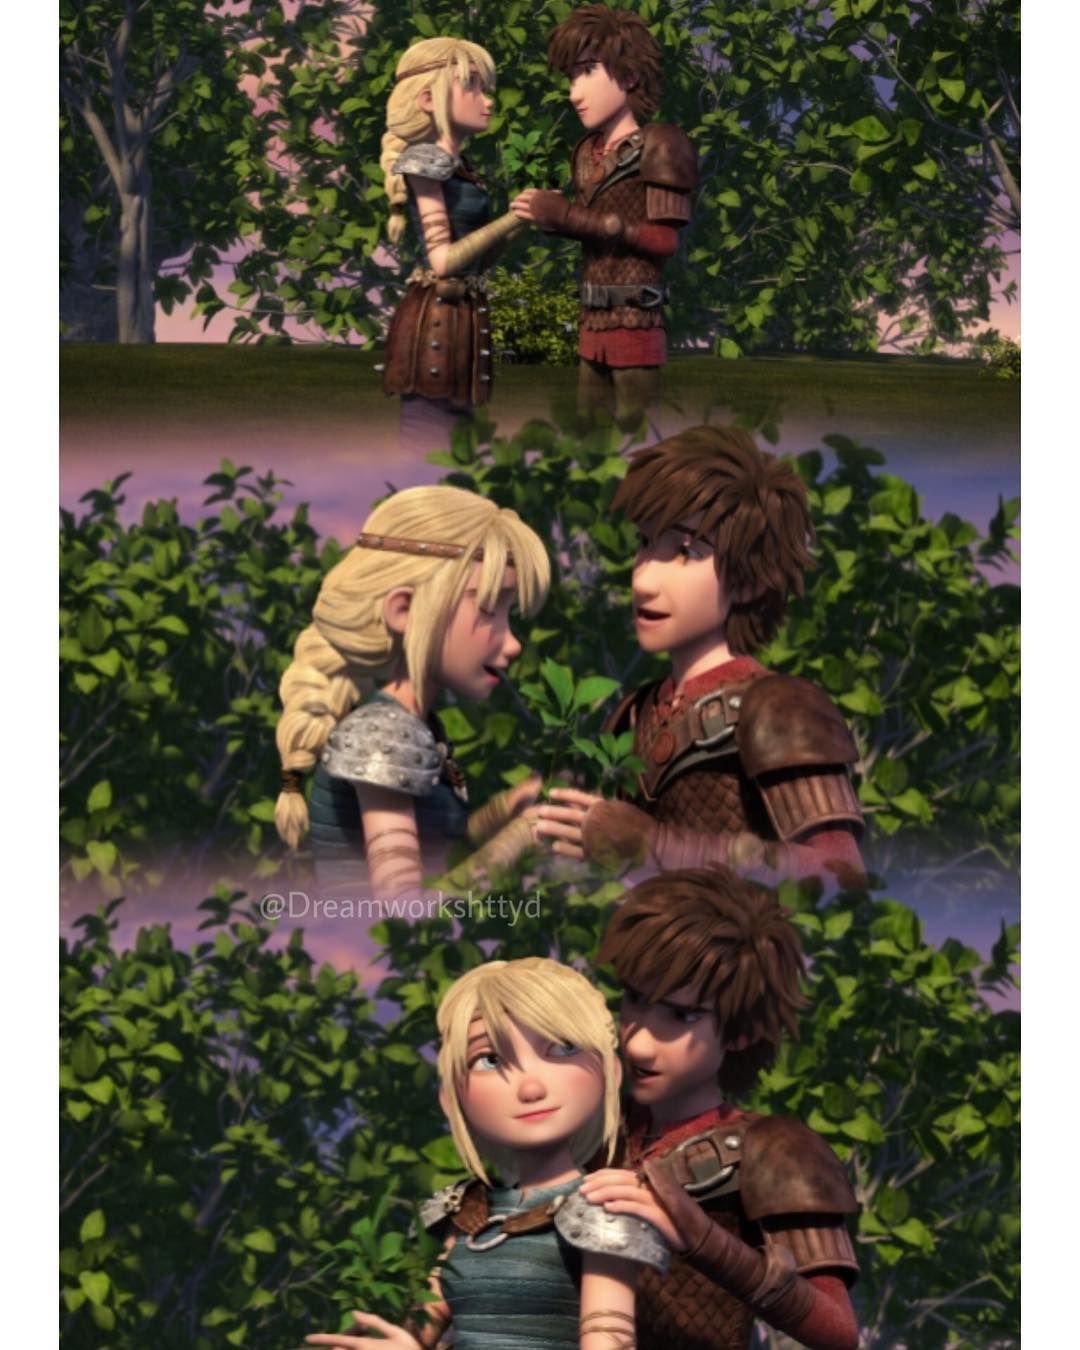 Evil hiccup